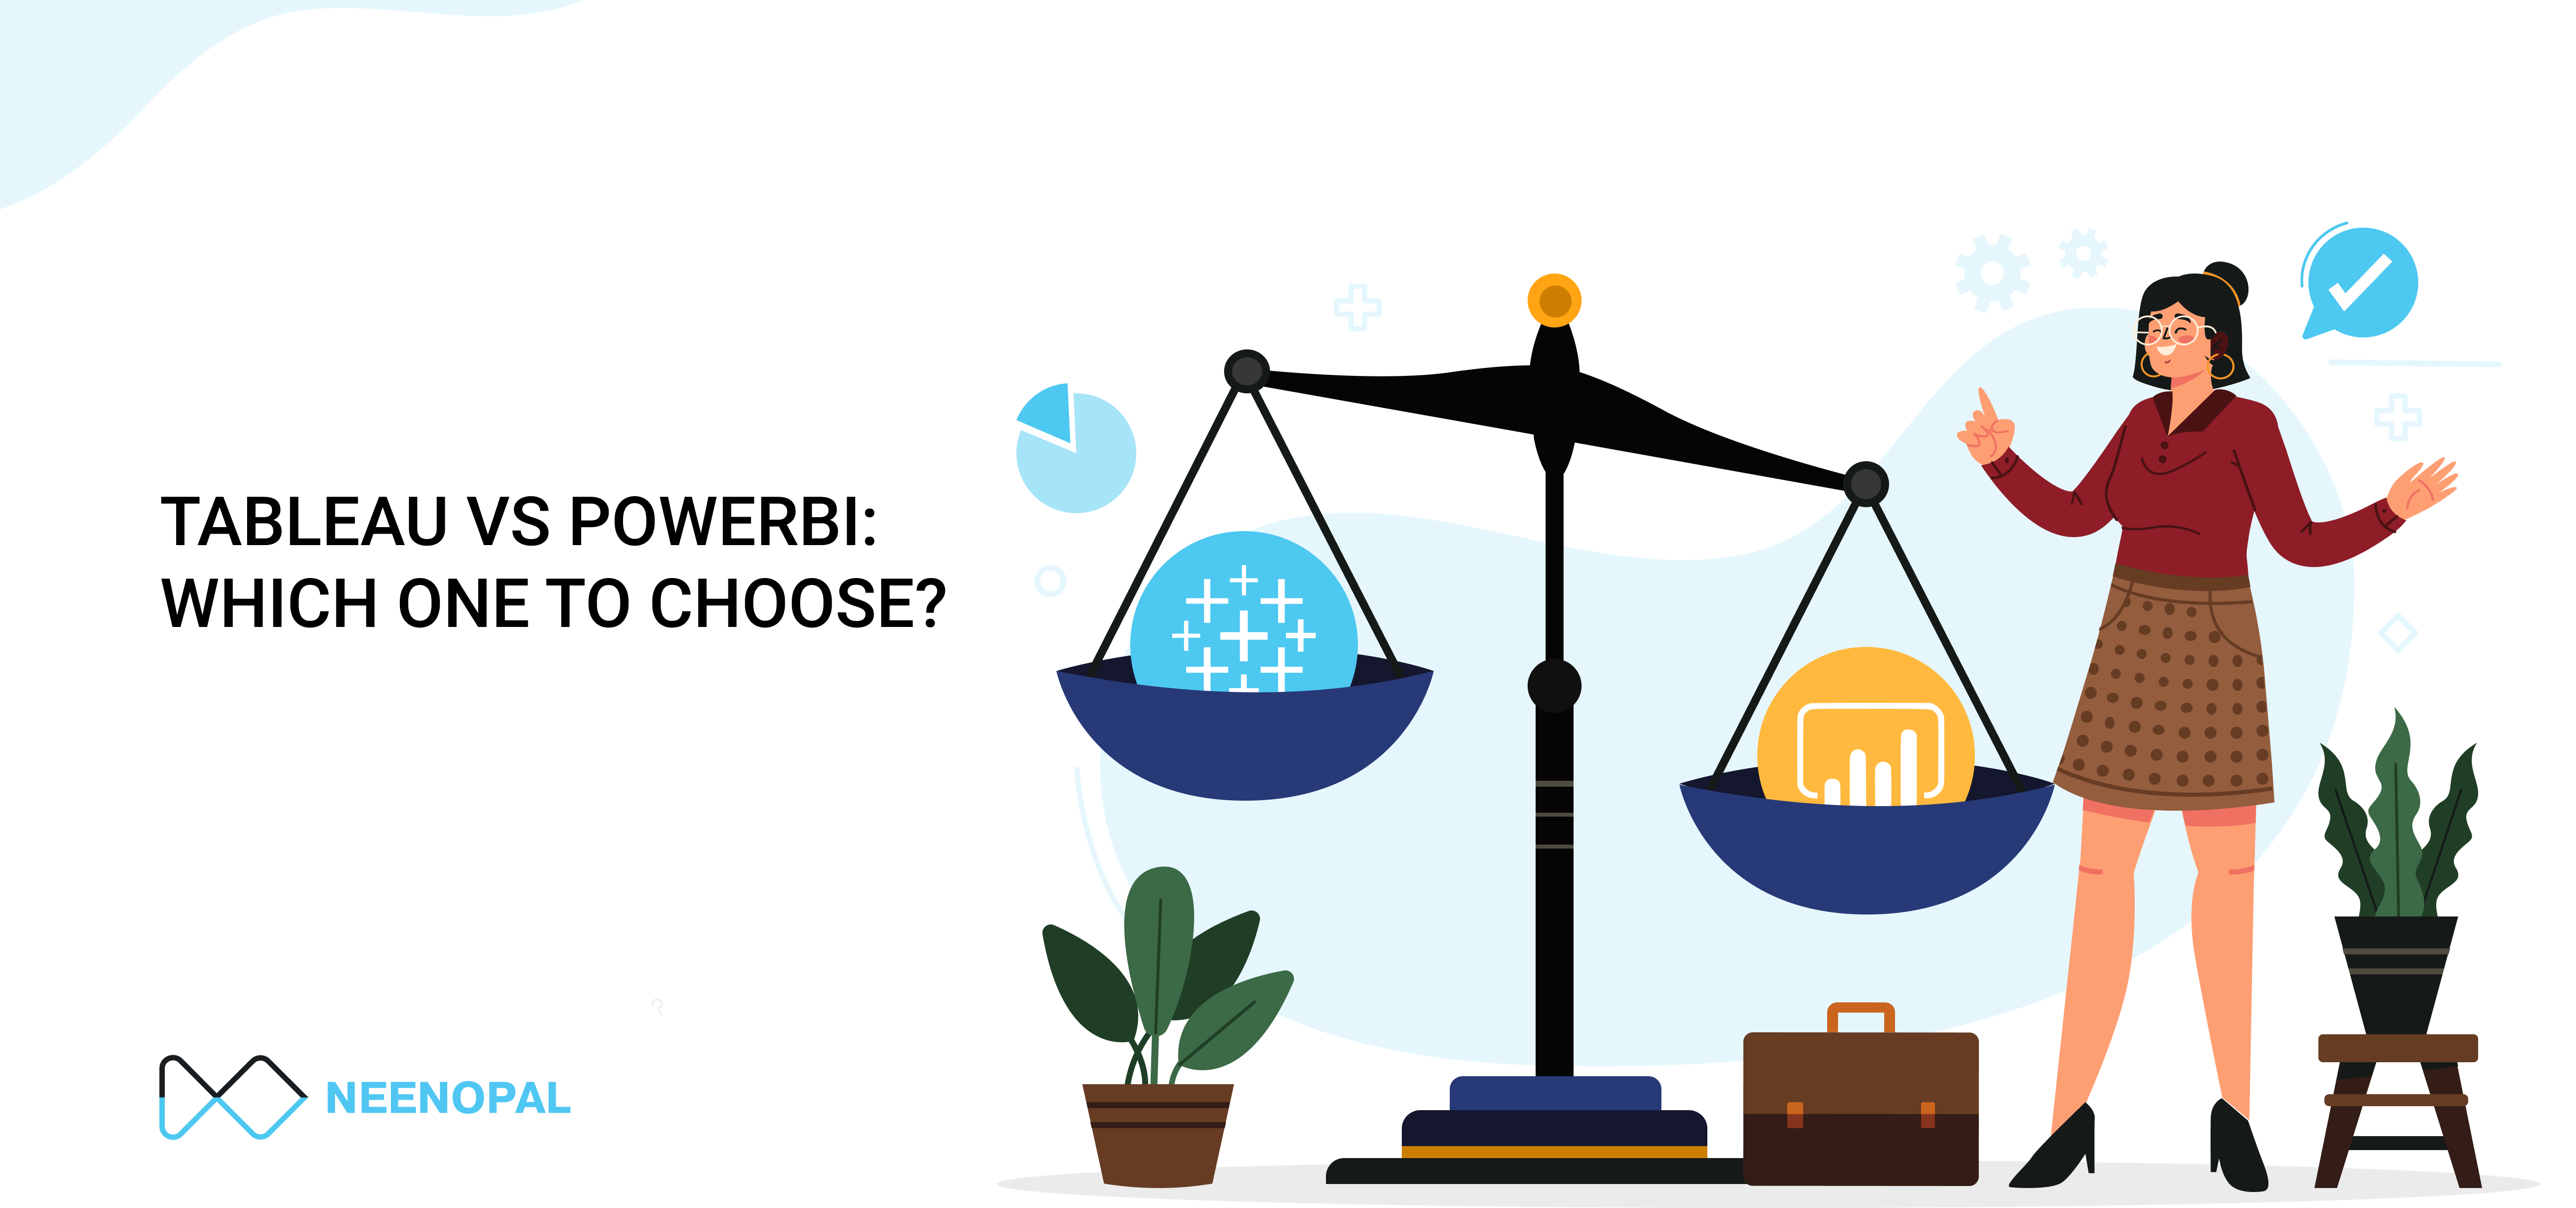 >TABLEAU vs POWERBI - WHICH ONE TO CHOOSE?